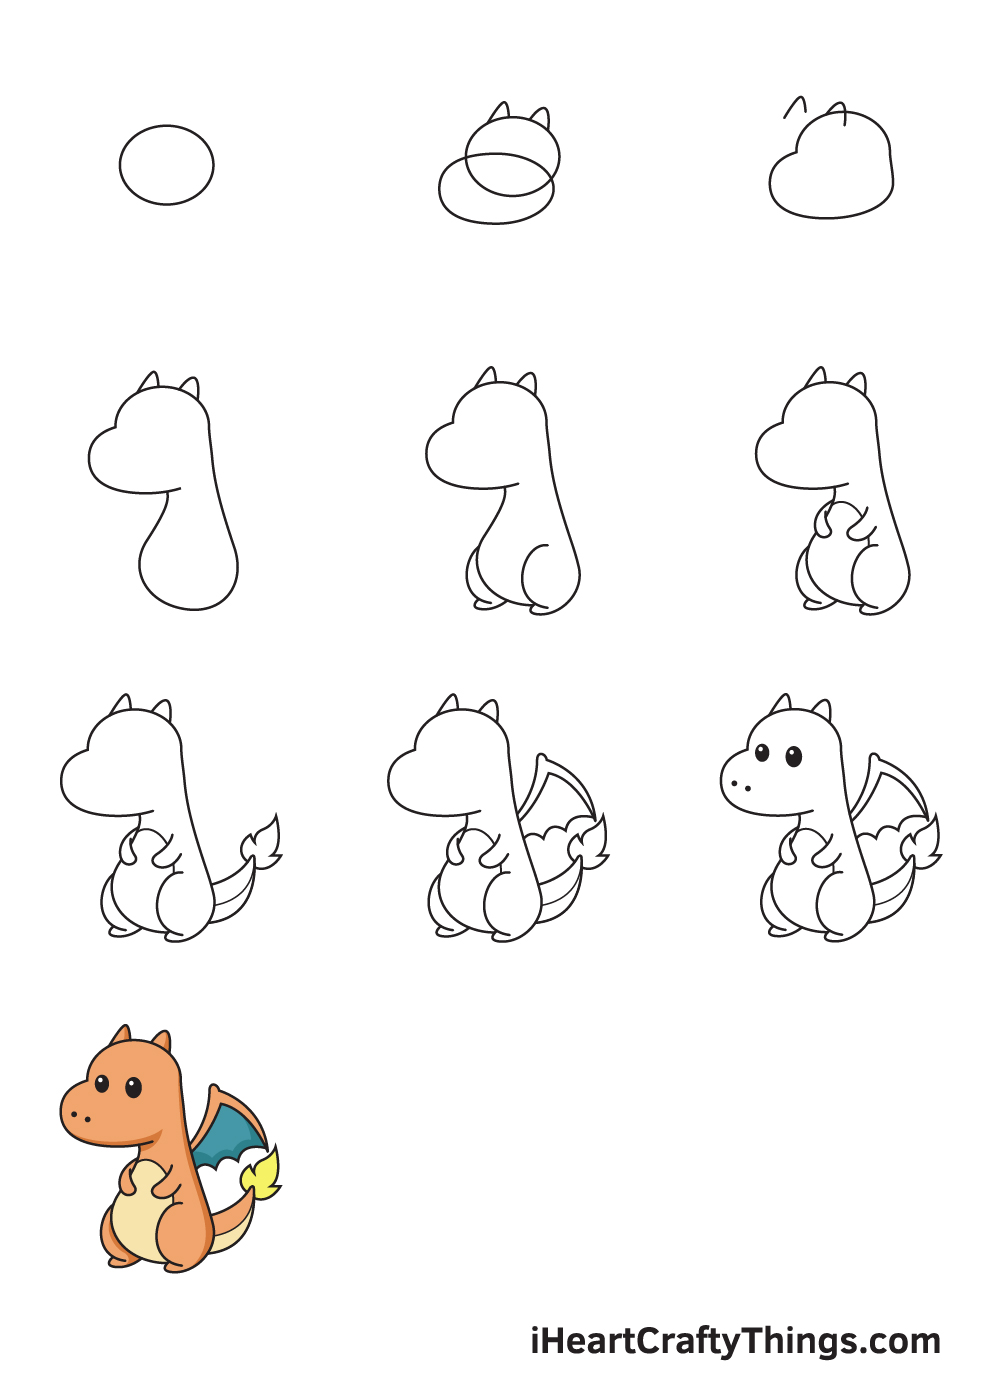 drawing charizard in 9 steps